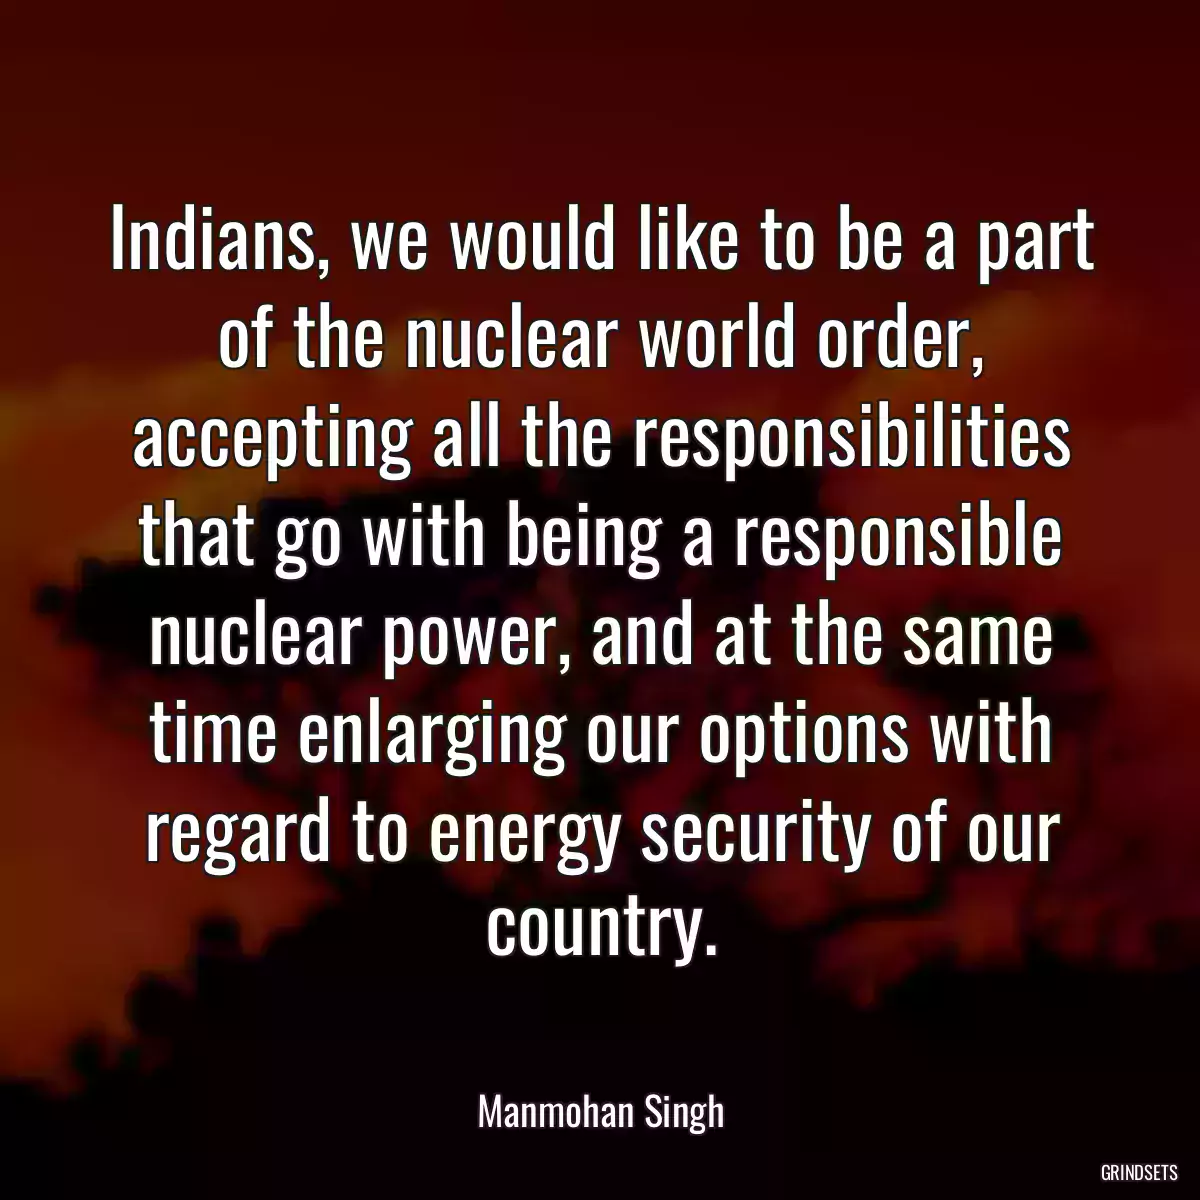 Indians, we would like to be a part of the nuclear world order, accepting all the responsibilities that go with being a responsible nuclear power, and at the same time enlarging our options with regard to energy security of our country.